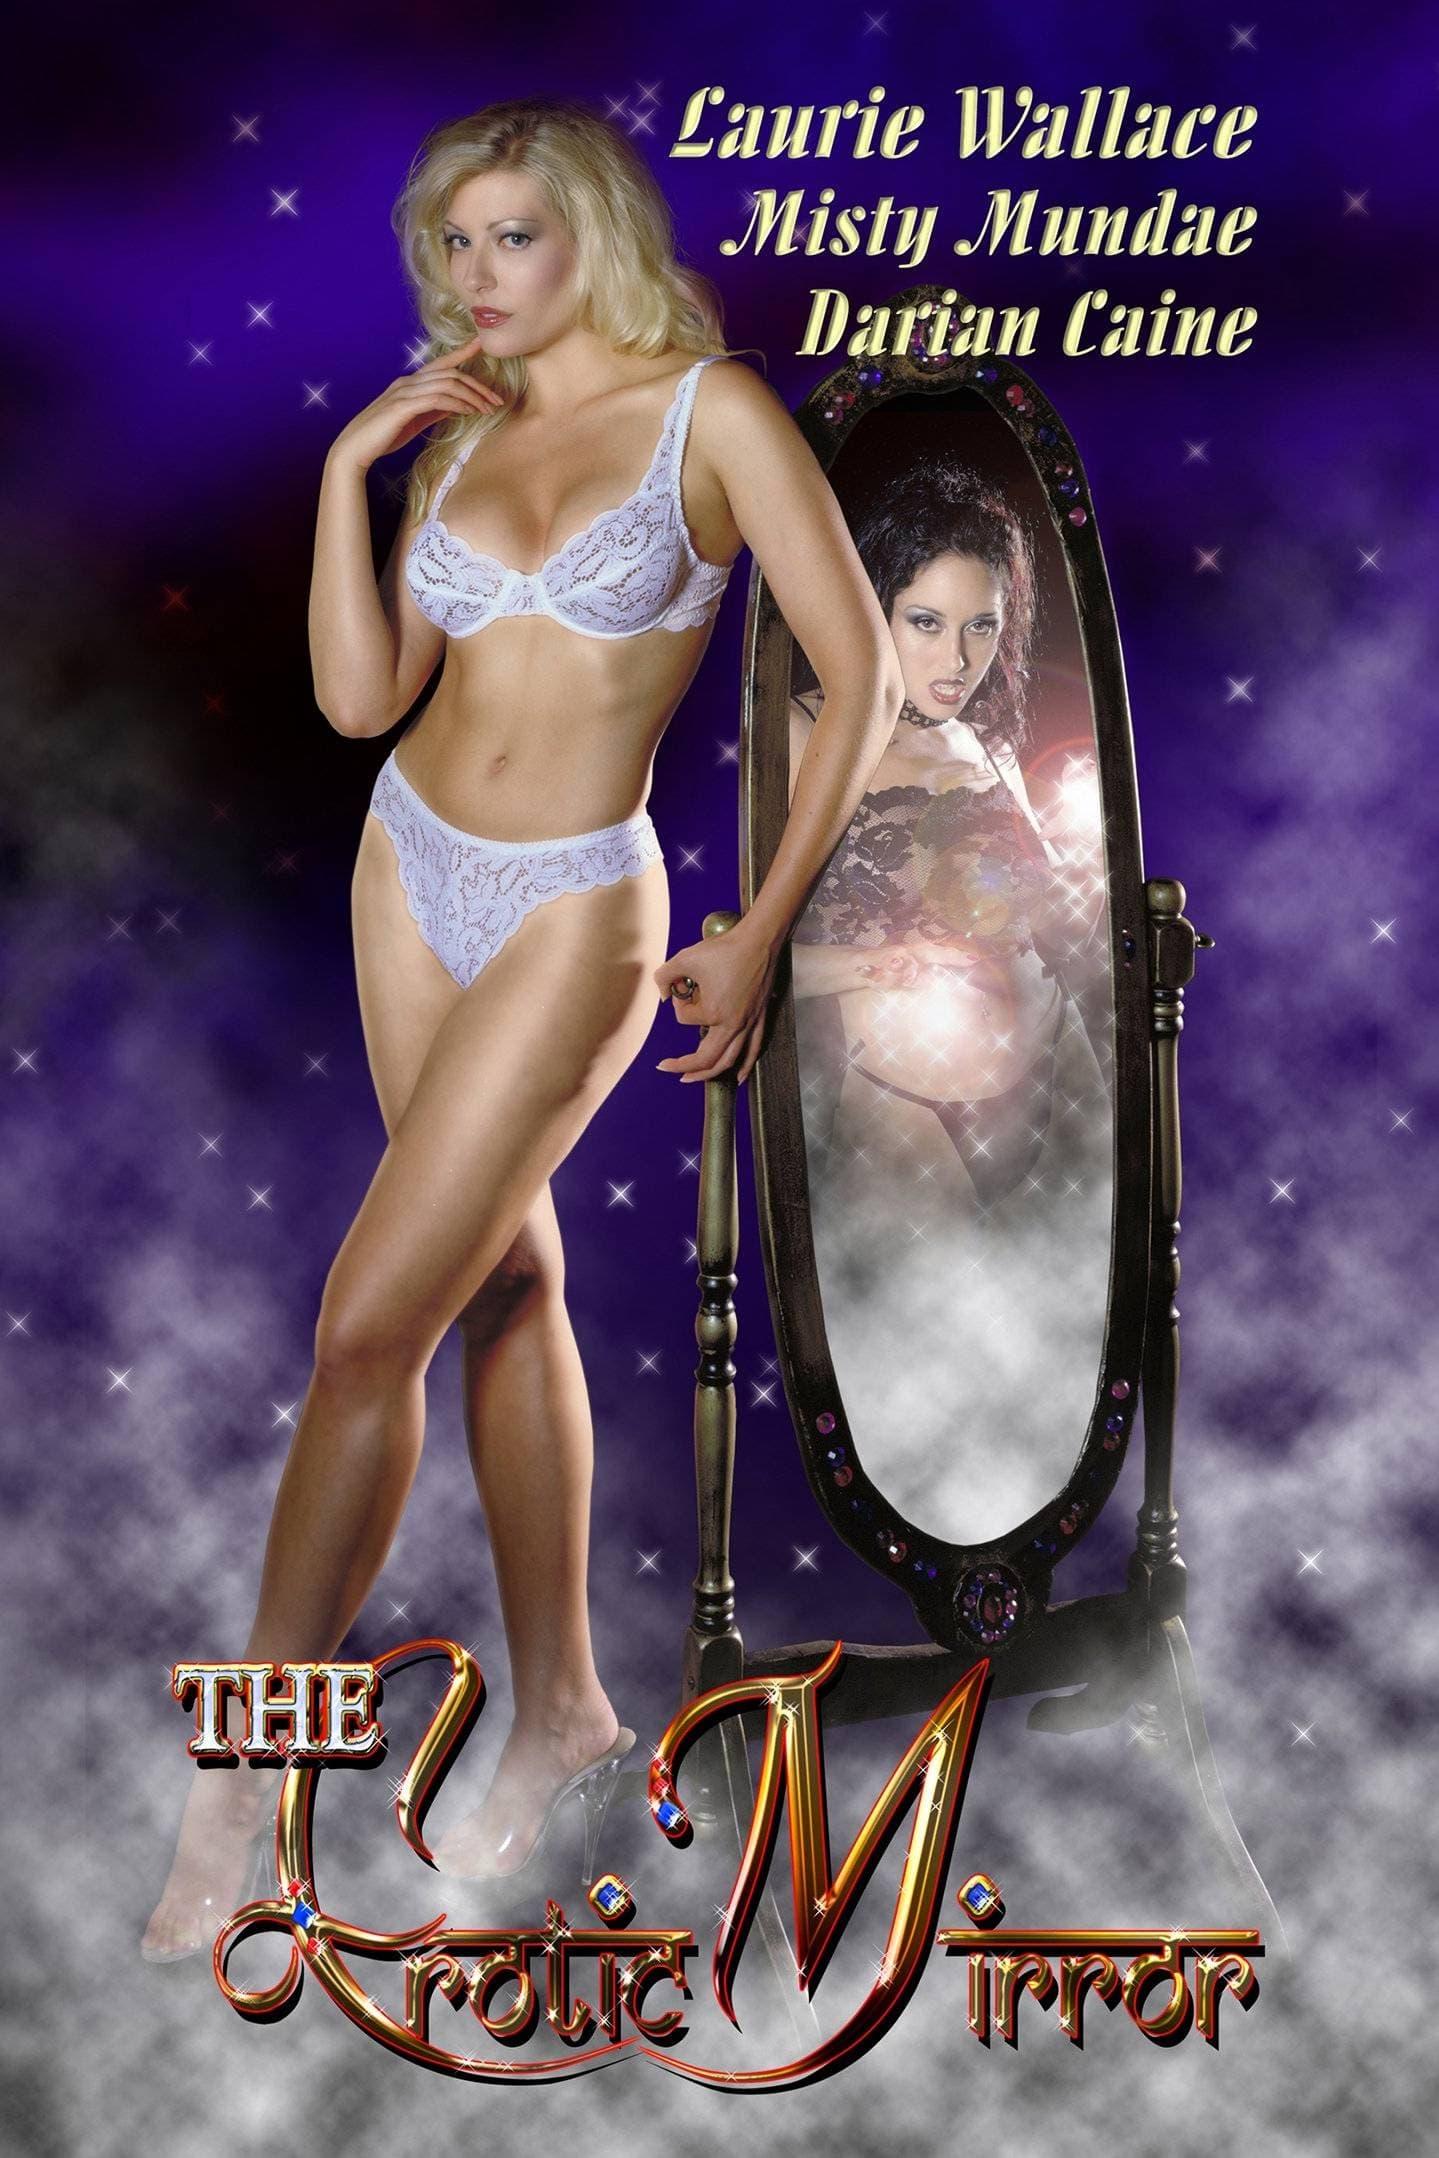 The Erotic Mirror poster